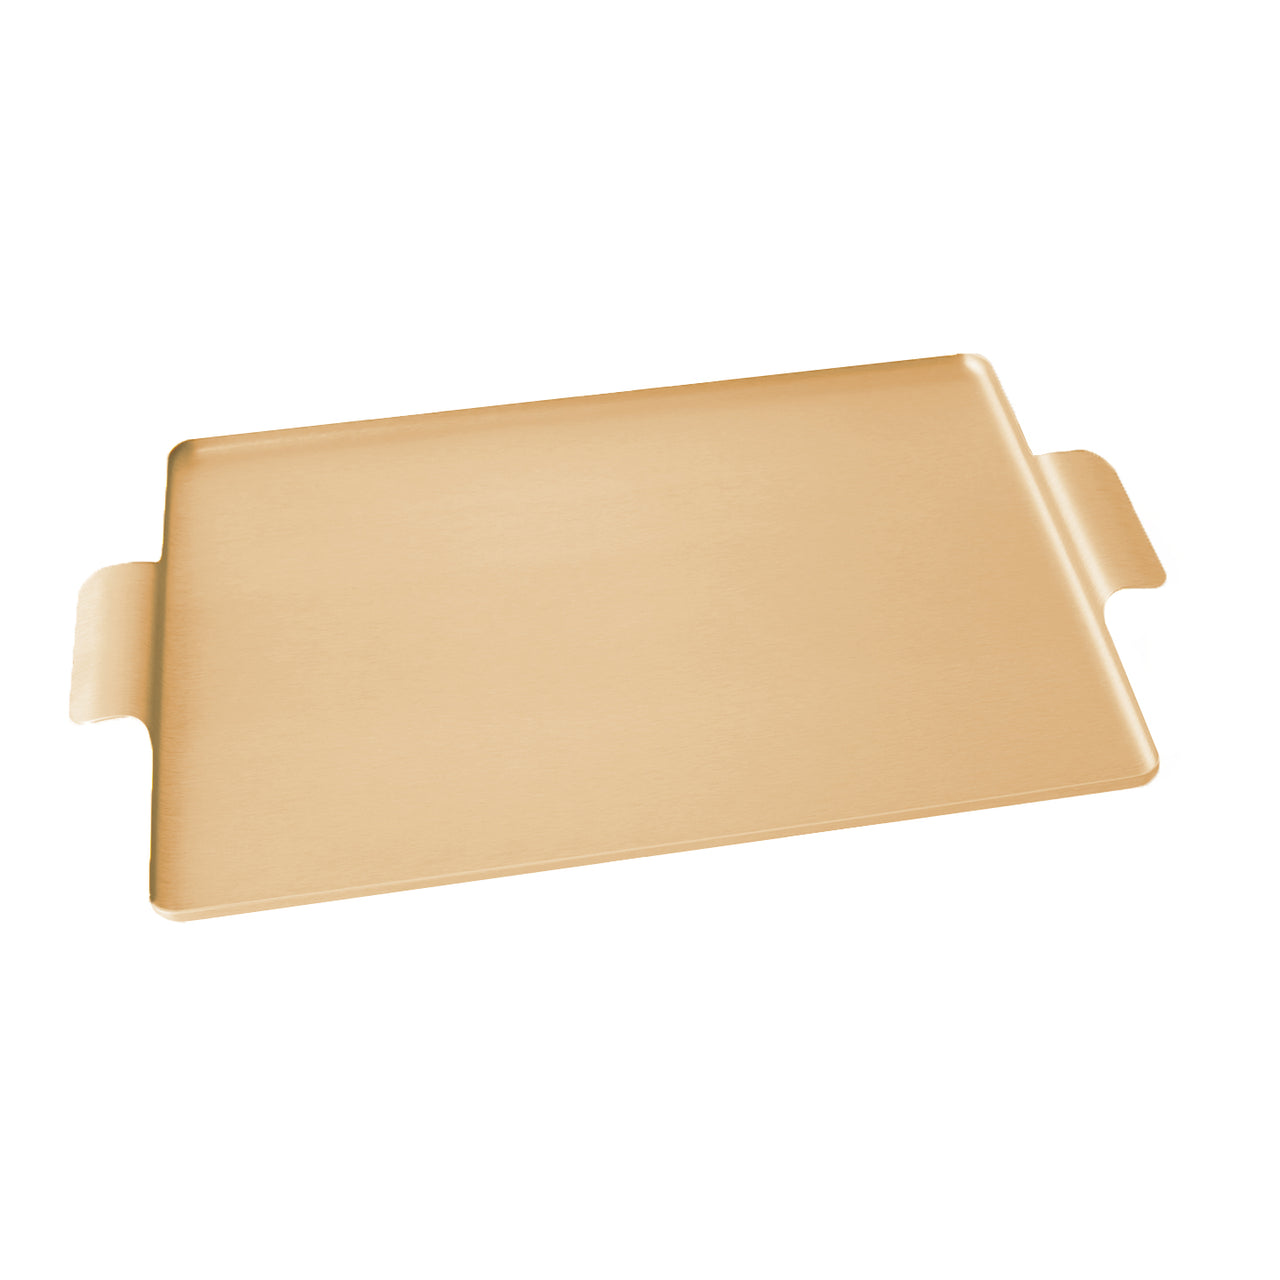 Kaymet Serving Tray Rectangle Gold